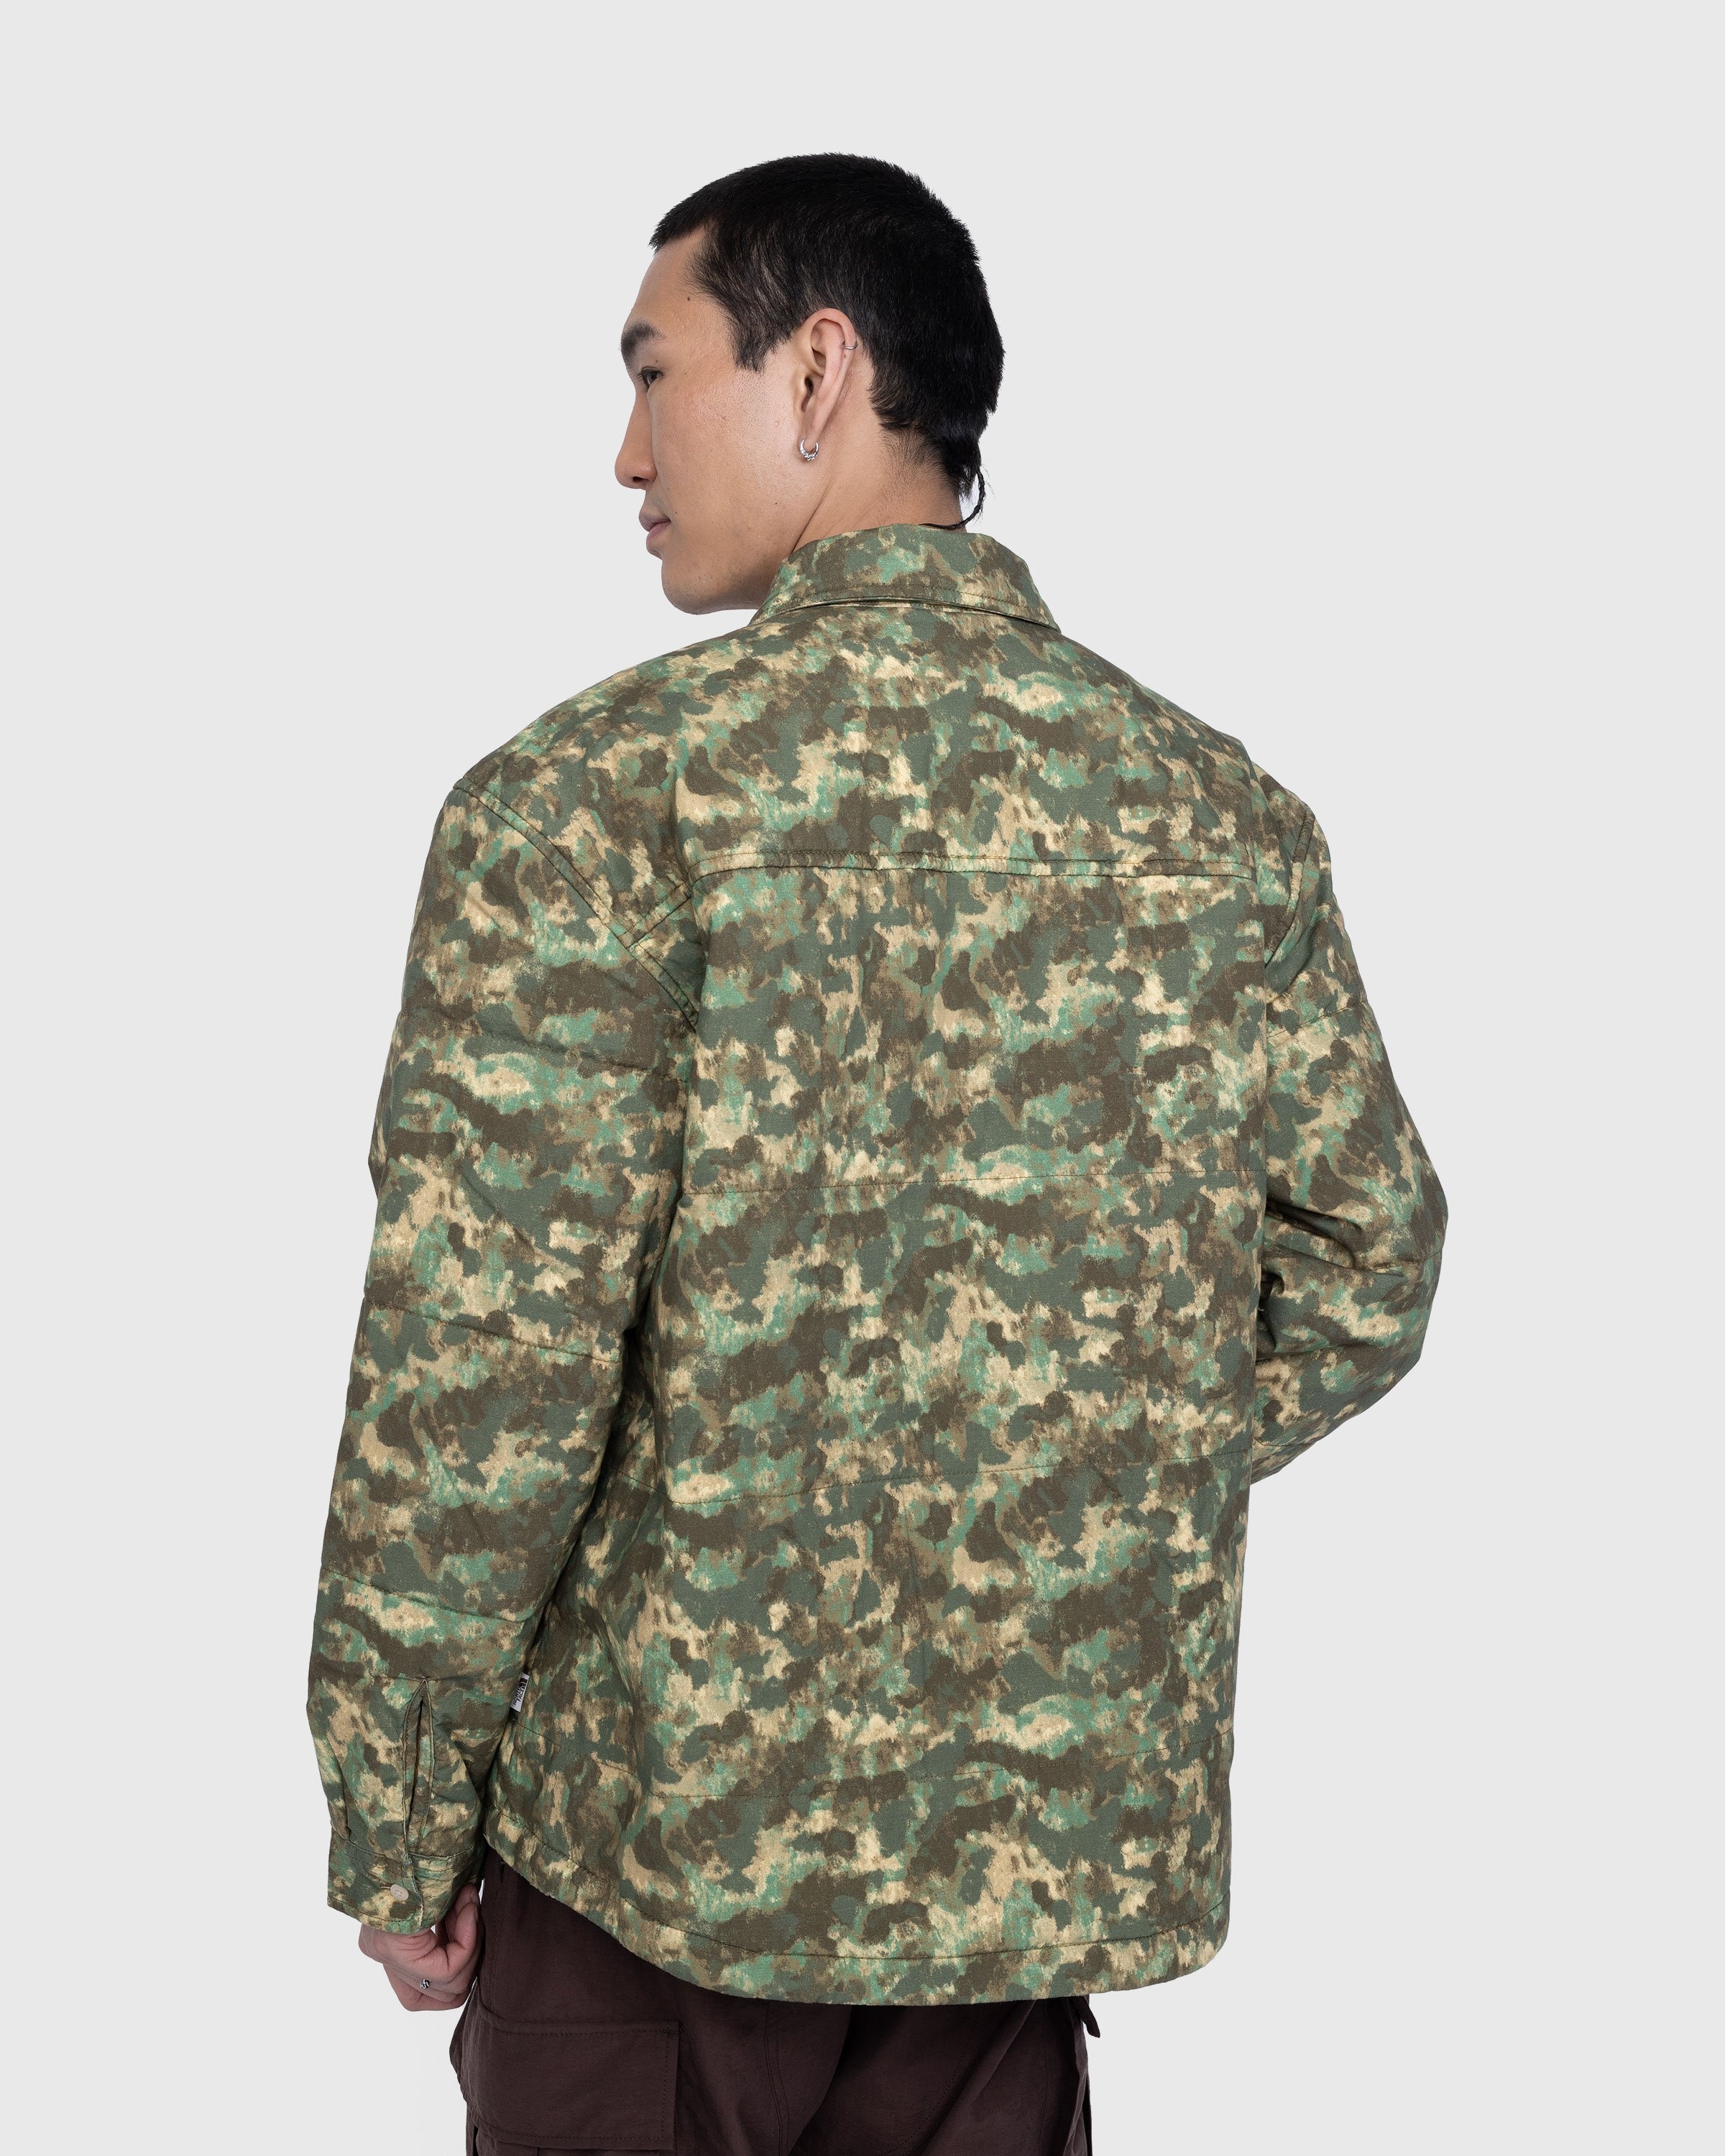 The North Face – M66 Utility Rain Jacket Military Olive/Stippled Camo Print - Outerwear - Green - Image 3